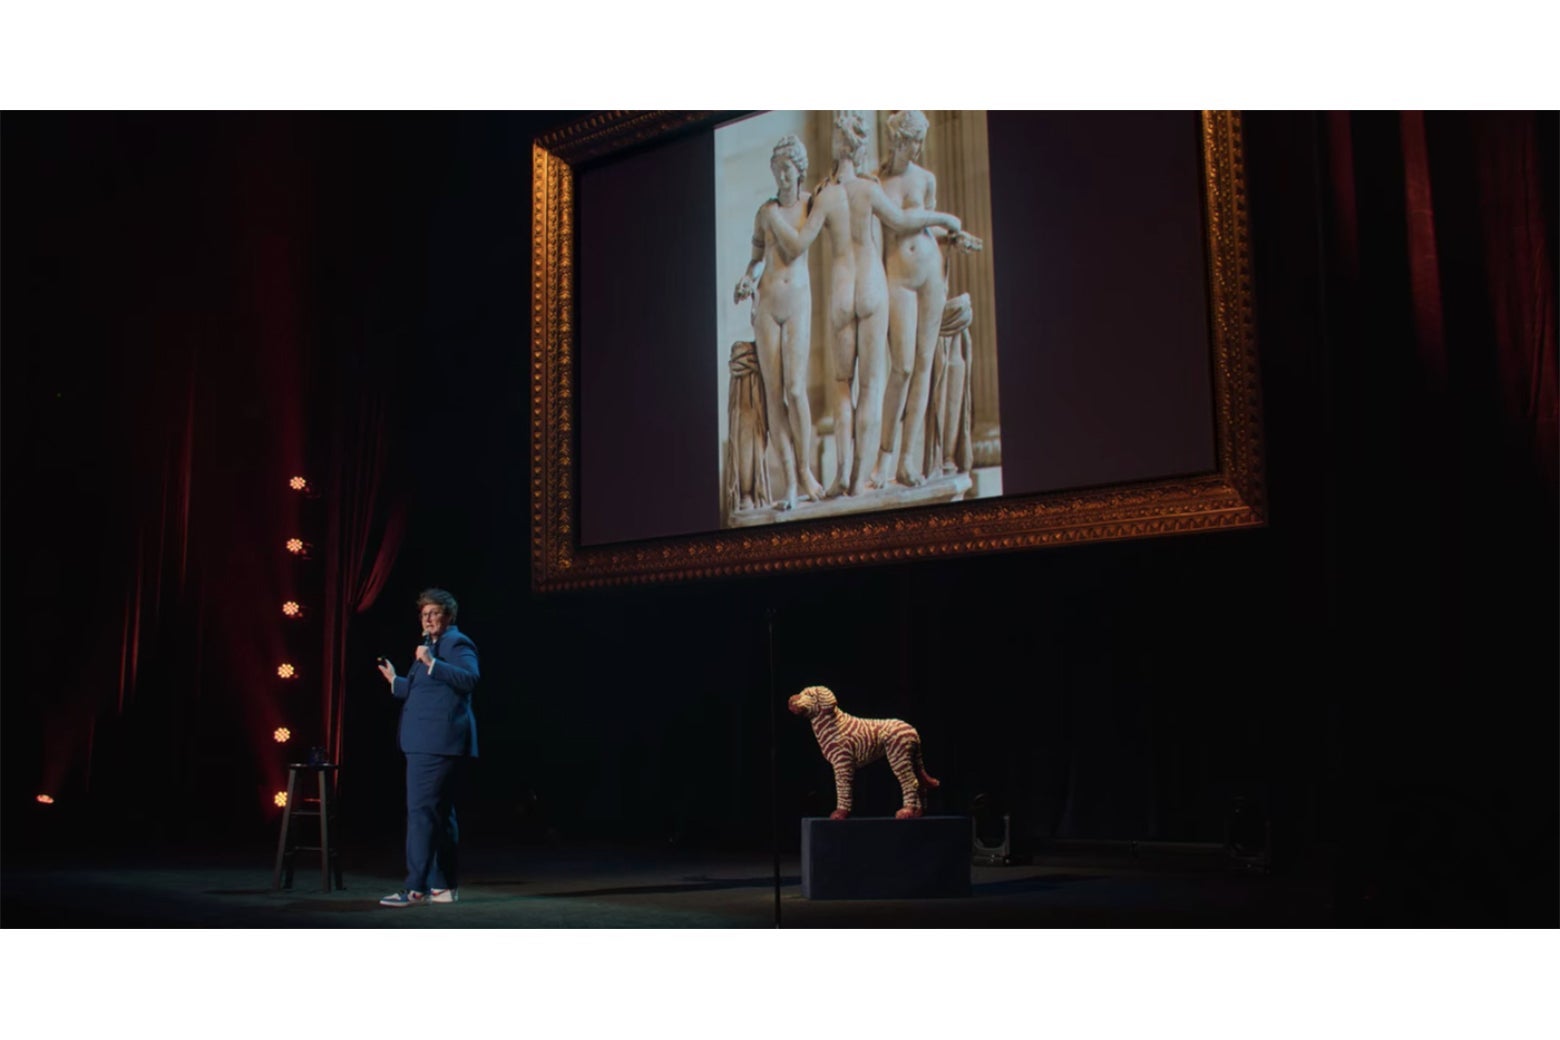 Hannah Gadsby onstage, in front of a screen displaying a photograph of a sculpture of the Three Graces.